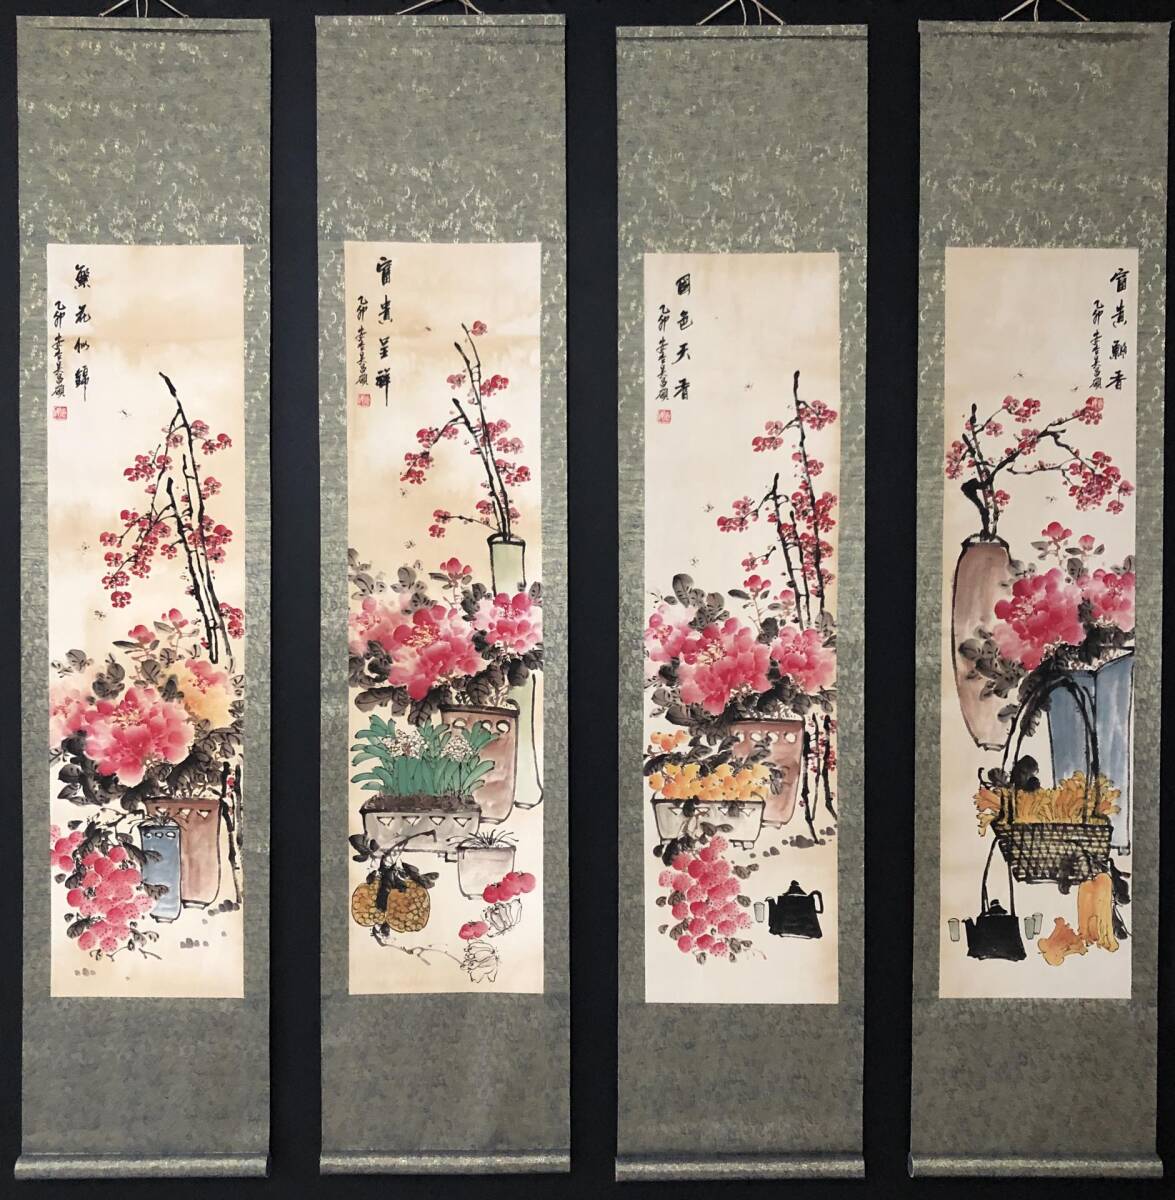 k Calligraphy and Paintings Calligraphy and Paintings Collection Changshuo [Fragrant Flower Screen, Shijo Byo: Hand-painted, Japanese painting, Chinese antique art, antique, ornament, prize, 3.21, Artwork, Painting, Ink painting